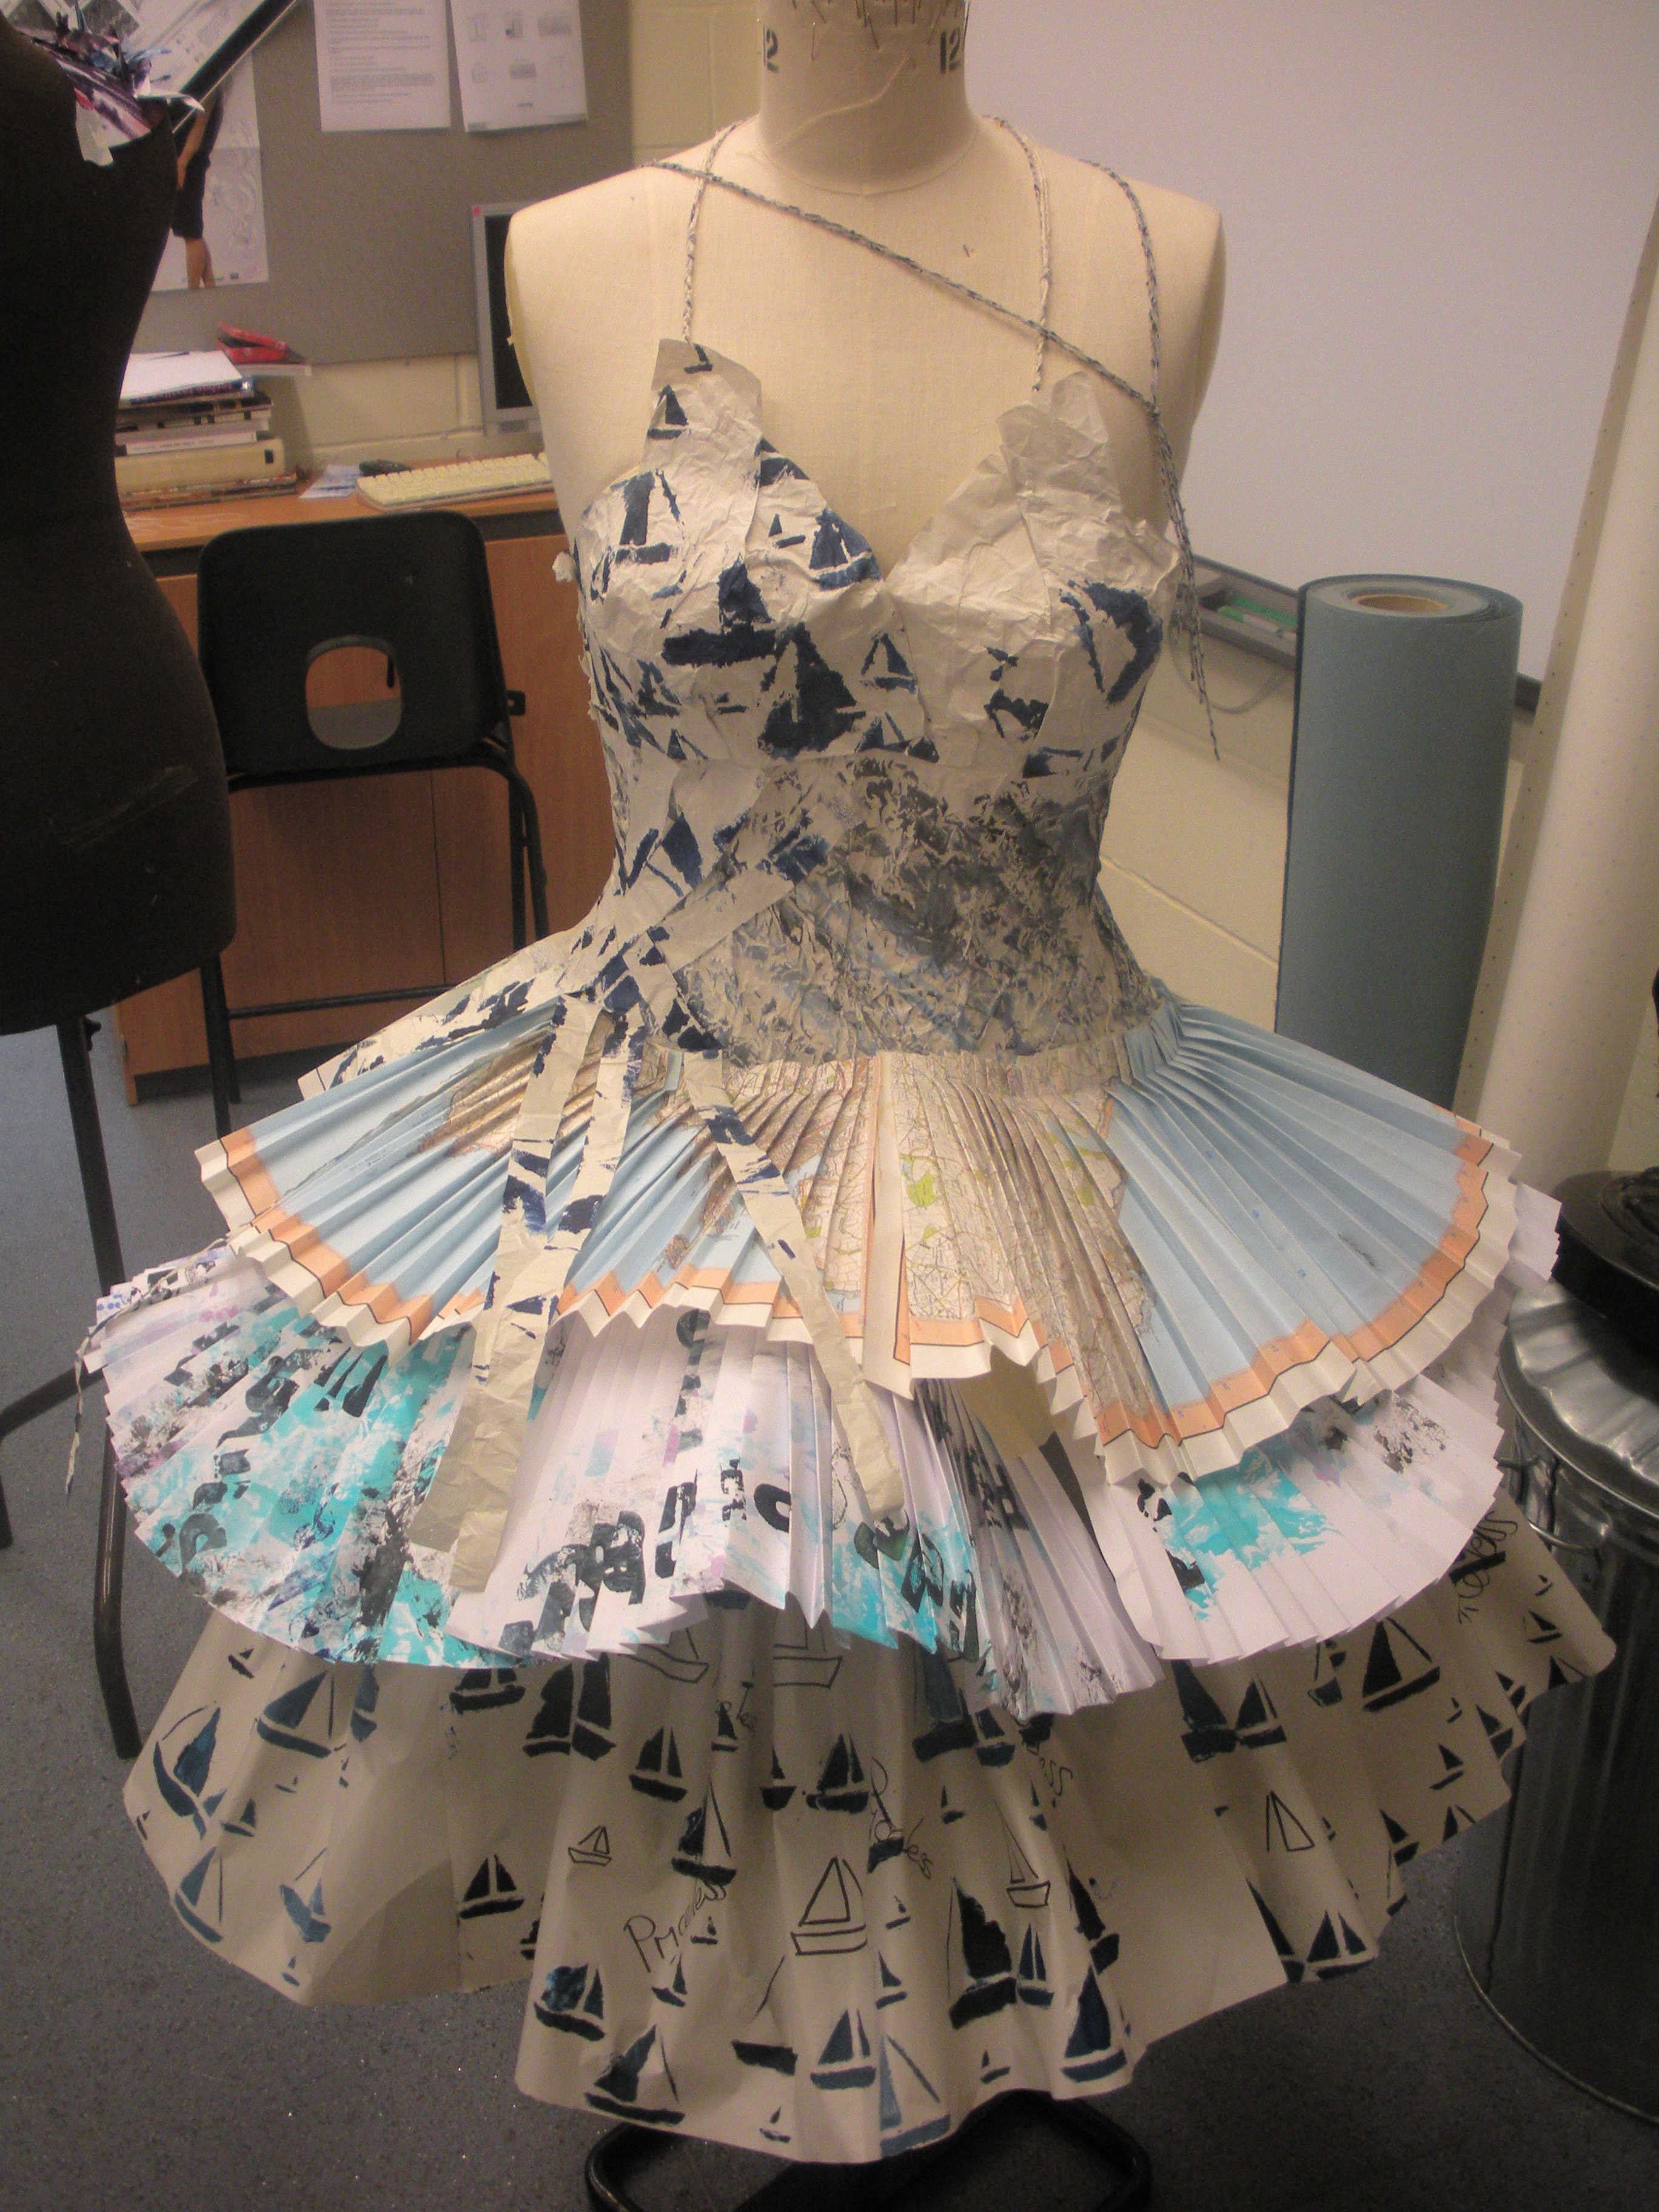 Urban nomad paper dress. – Sewing Projects | BurdaStyle.com